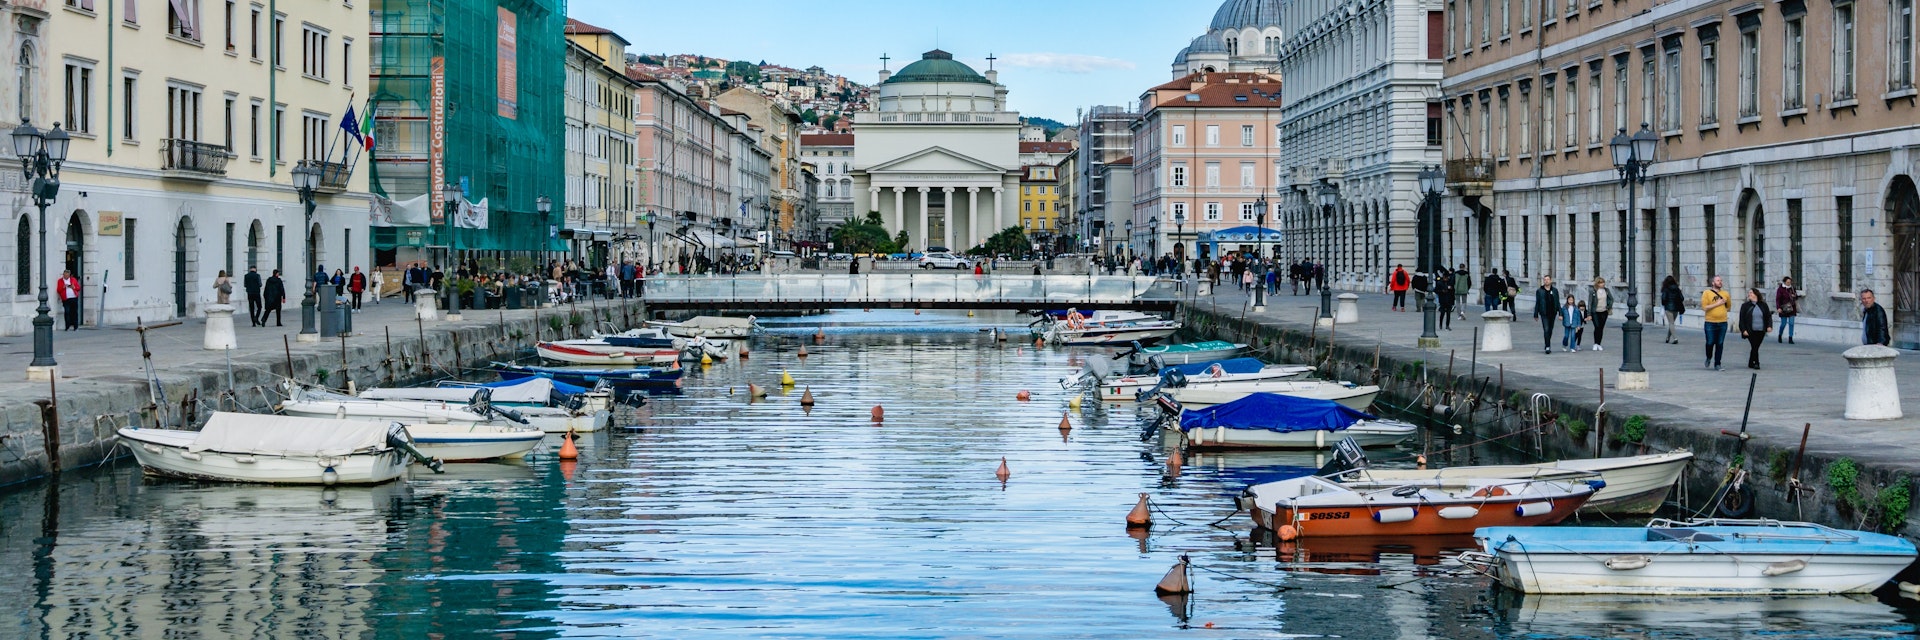 The Grand Canal of Trieste is a navigable canal located in the heart of the Borgo Teresiano, in the heart of the city.